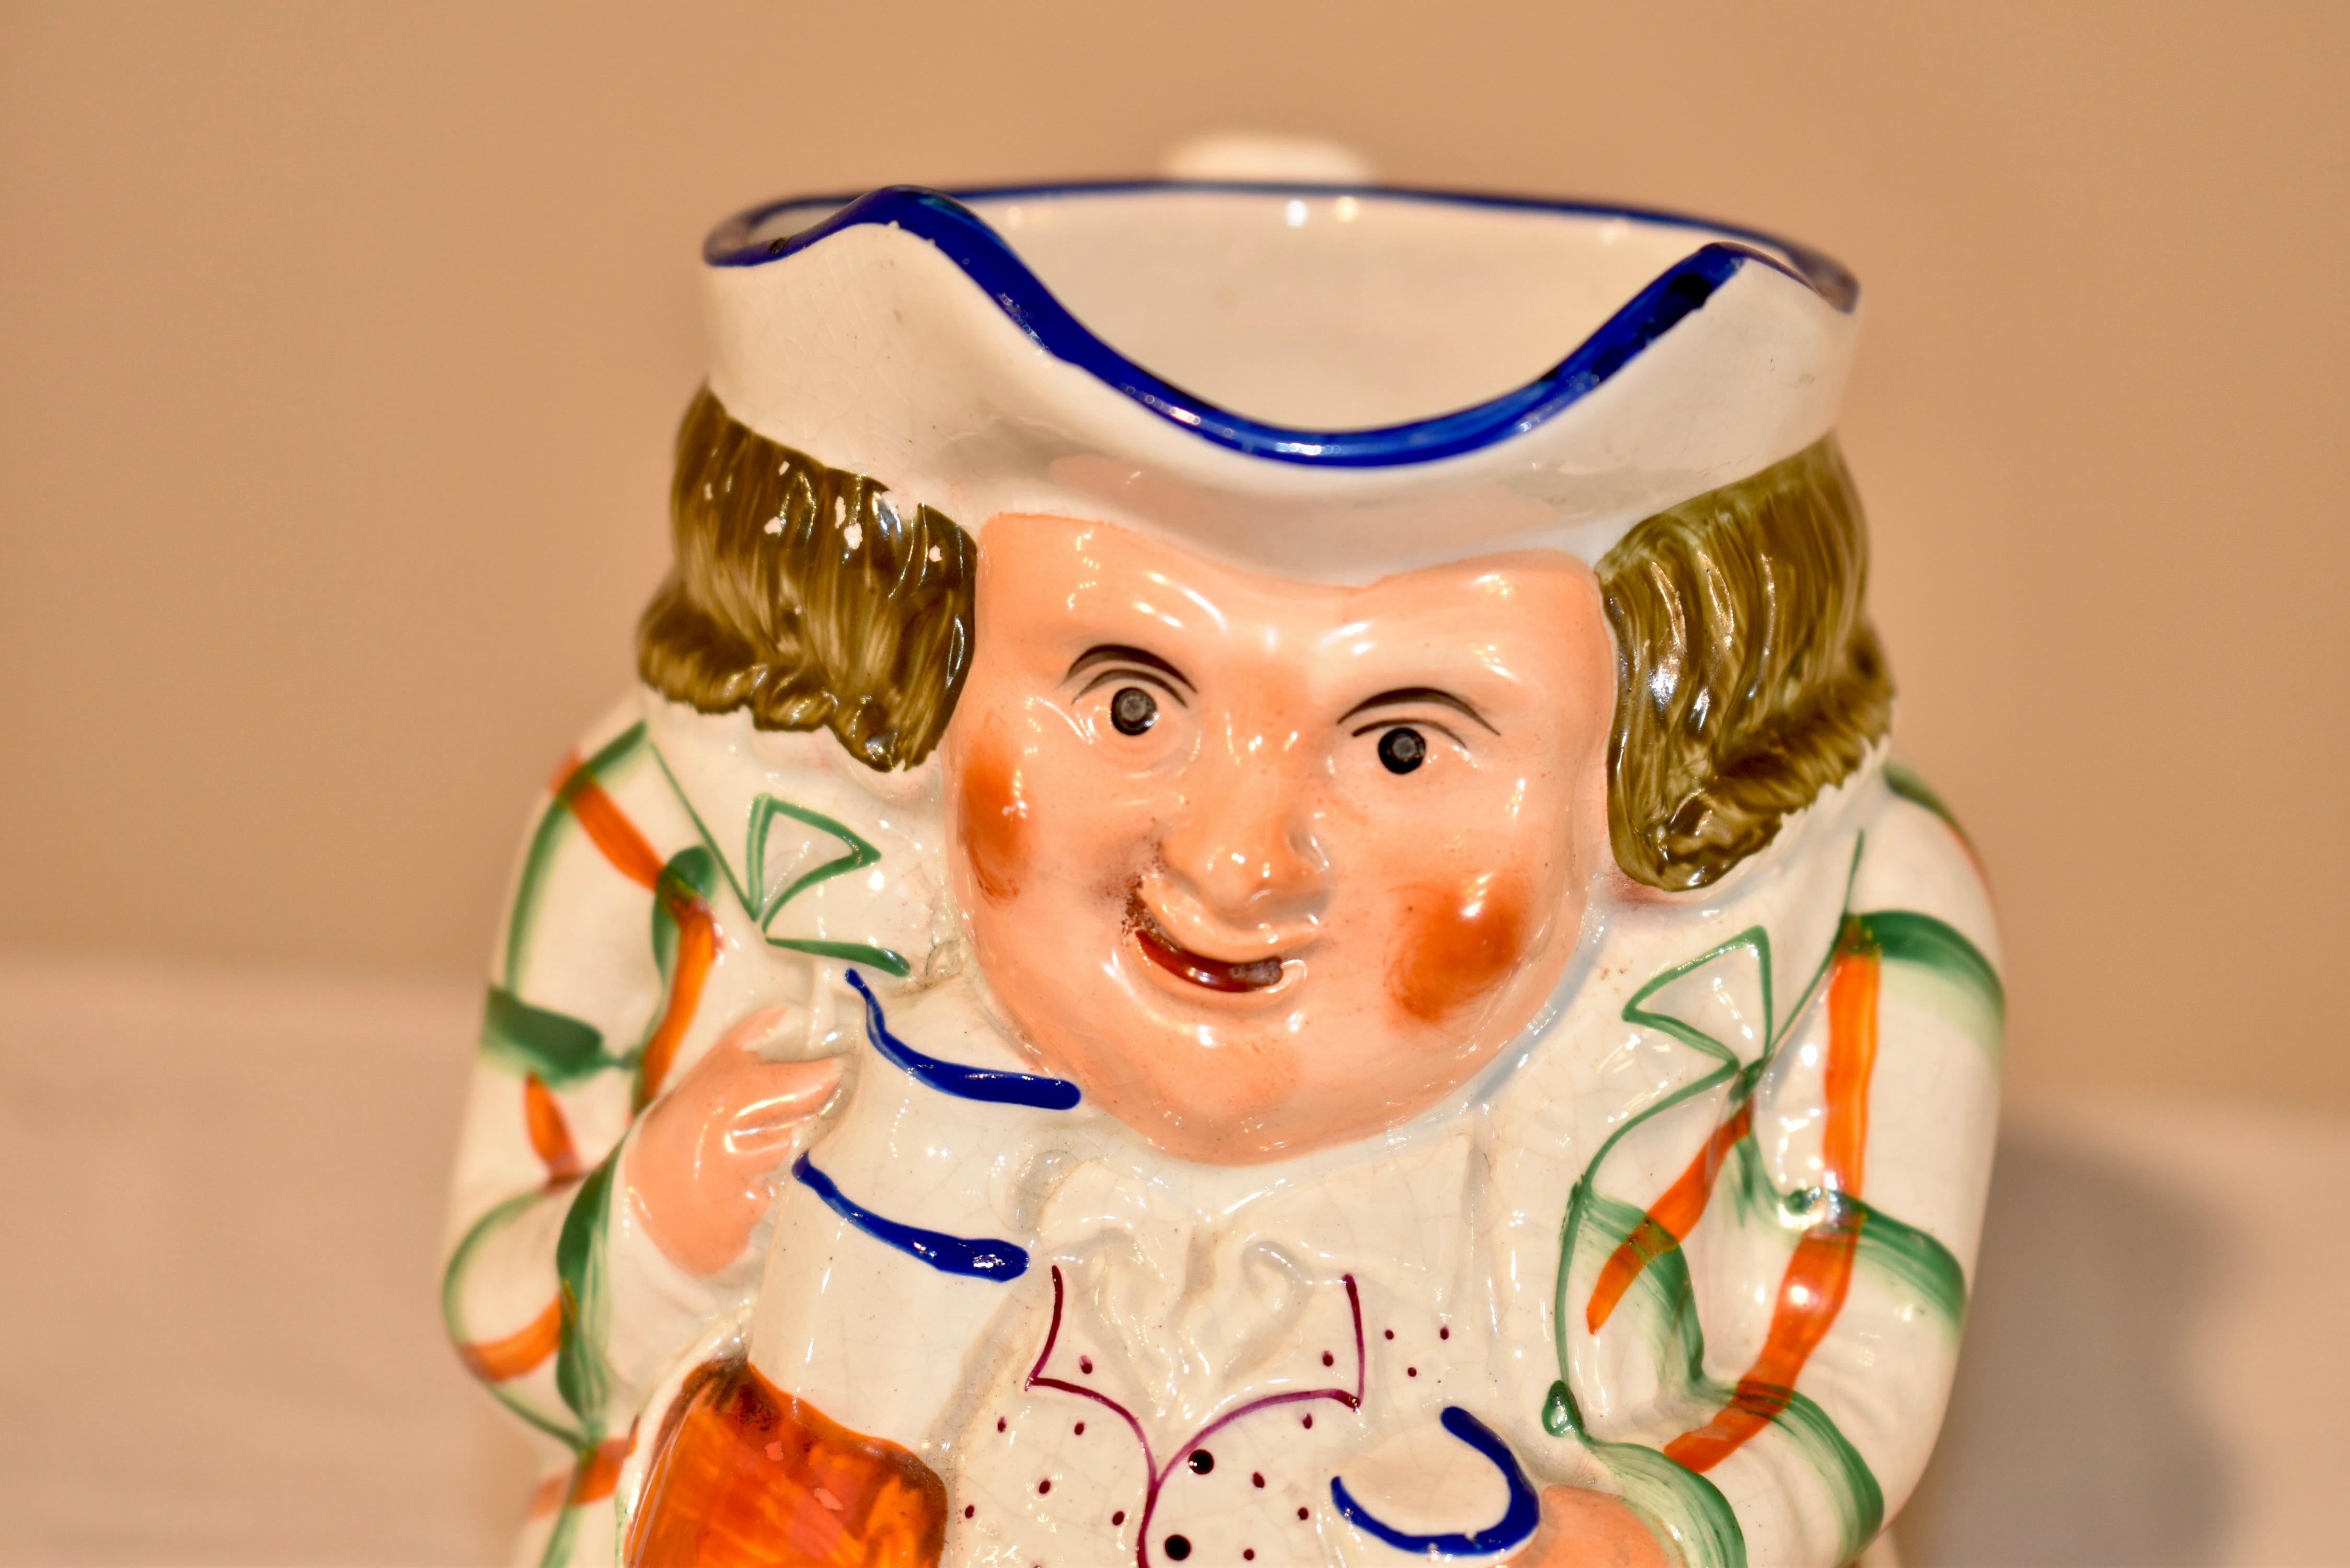 19th century ceramic Toby jug from the Staffordshire region of England.  He has a lovely plaid jacket and polka dotted vest.  He wears a warm expression on his face.  